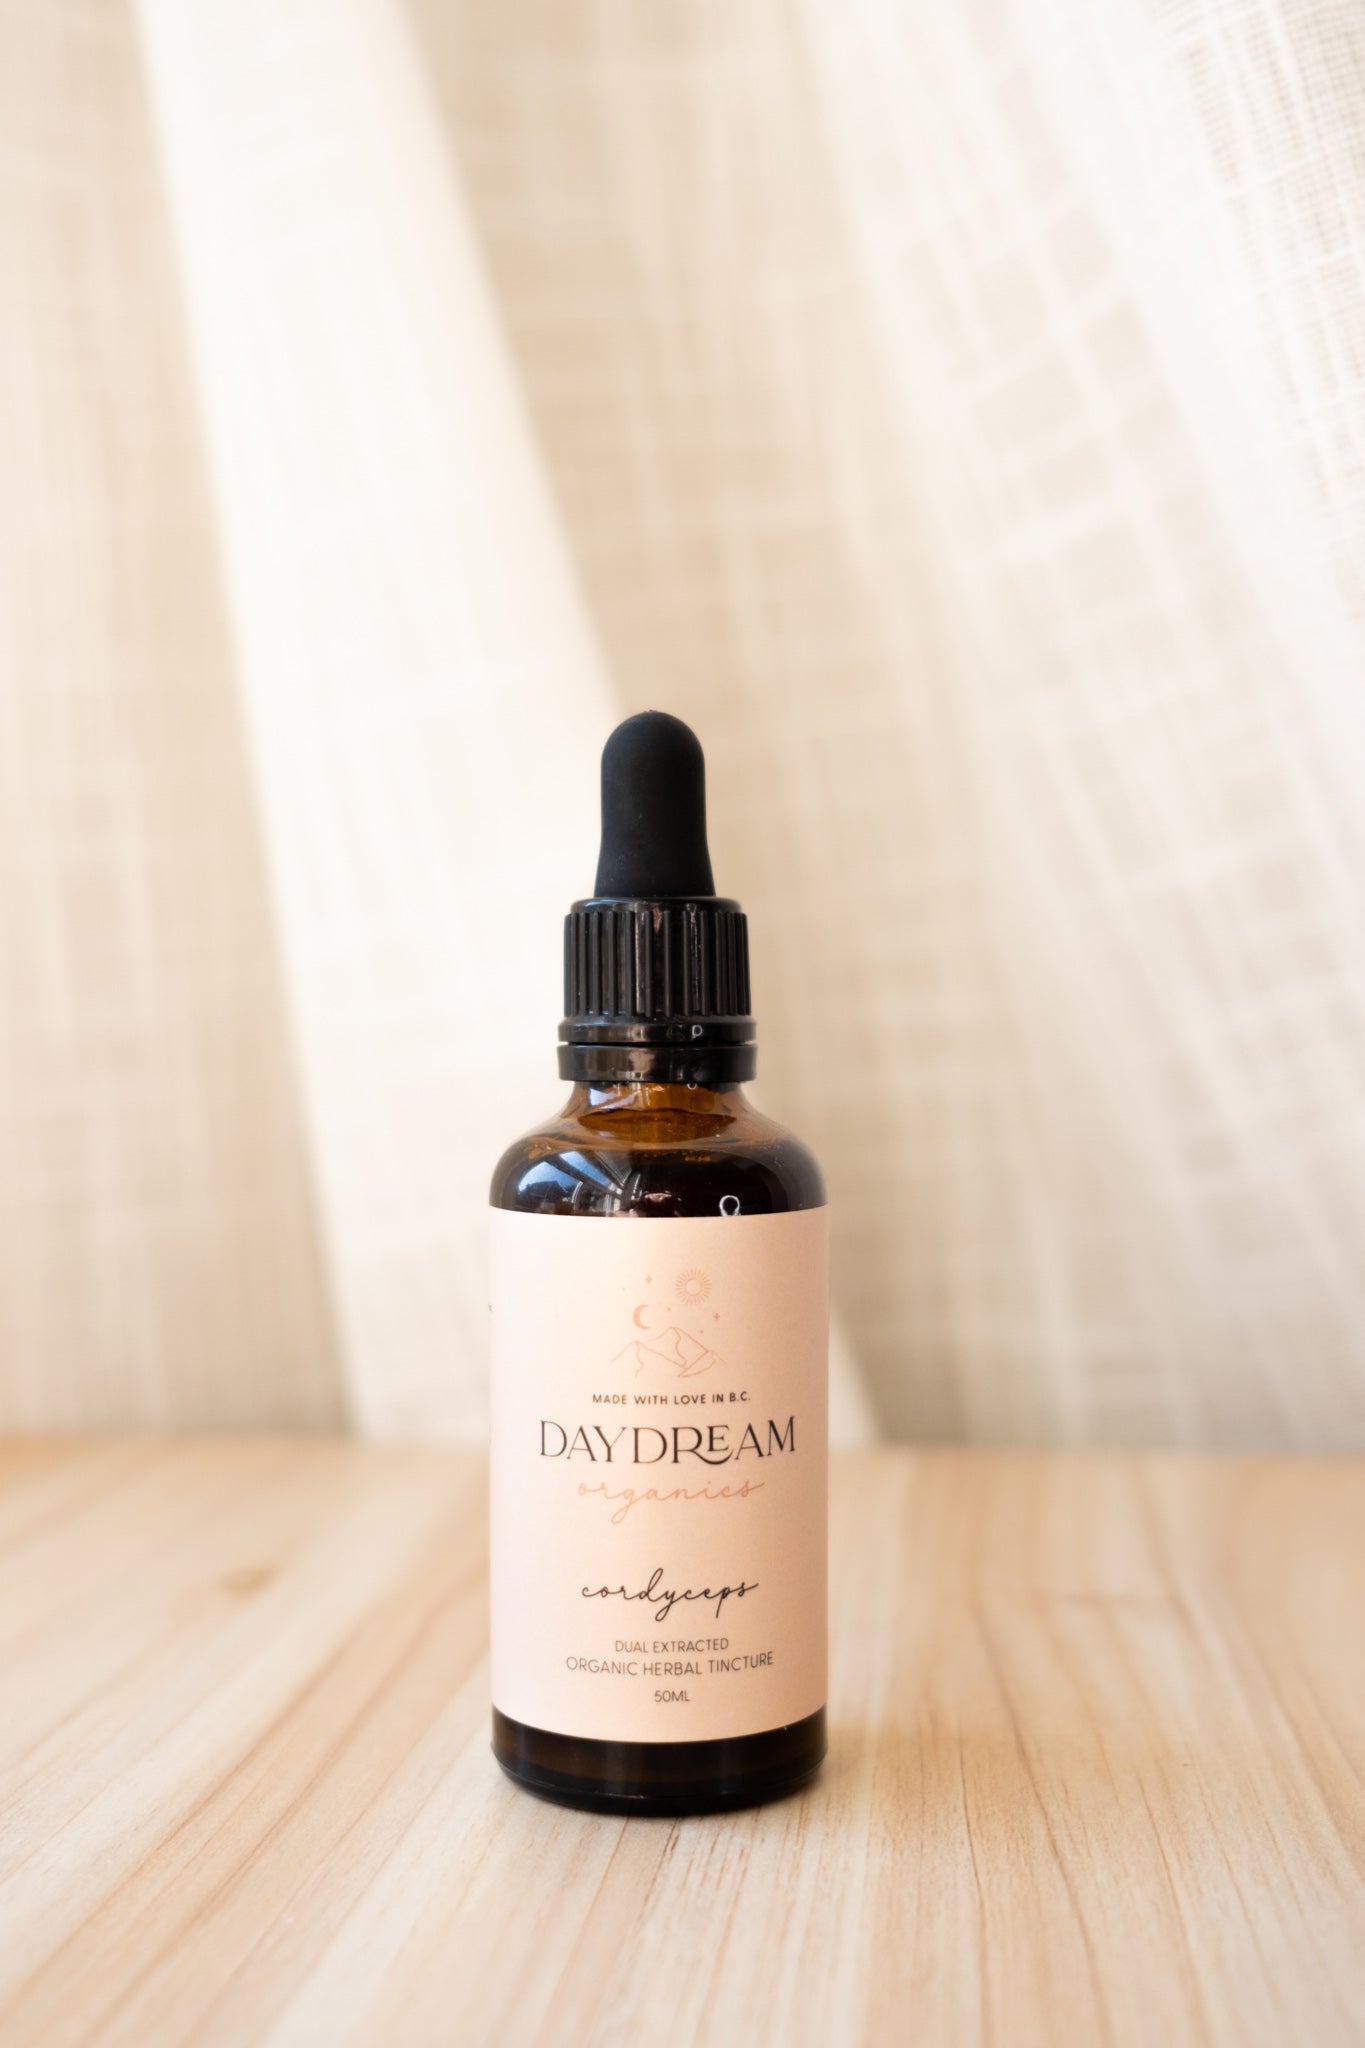 Our organic, dual extracted Cordyceps mushroom tincture is an adaptogenic mushroom tincture that can be used to stabilize energy and stress levels as well as enhance stamina, endurance and oxygen uptake.